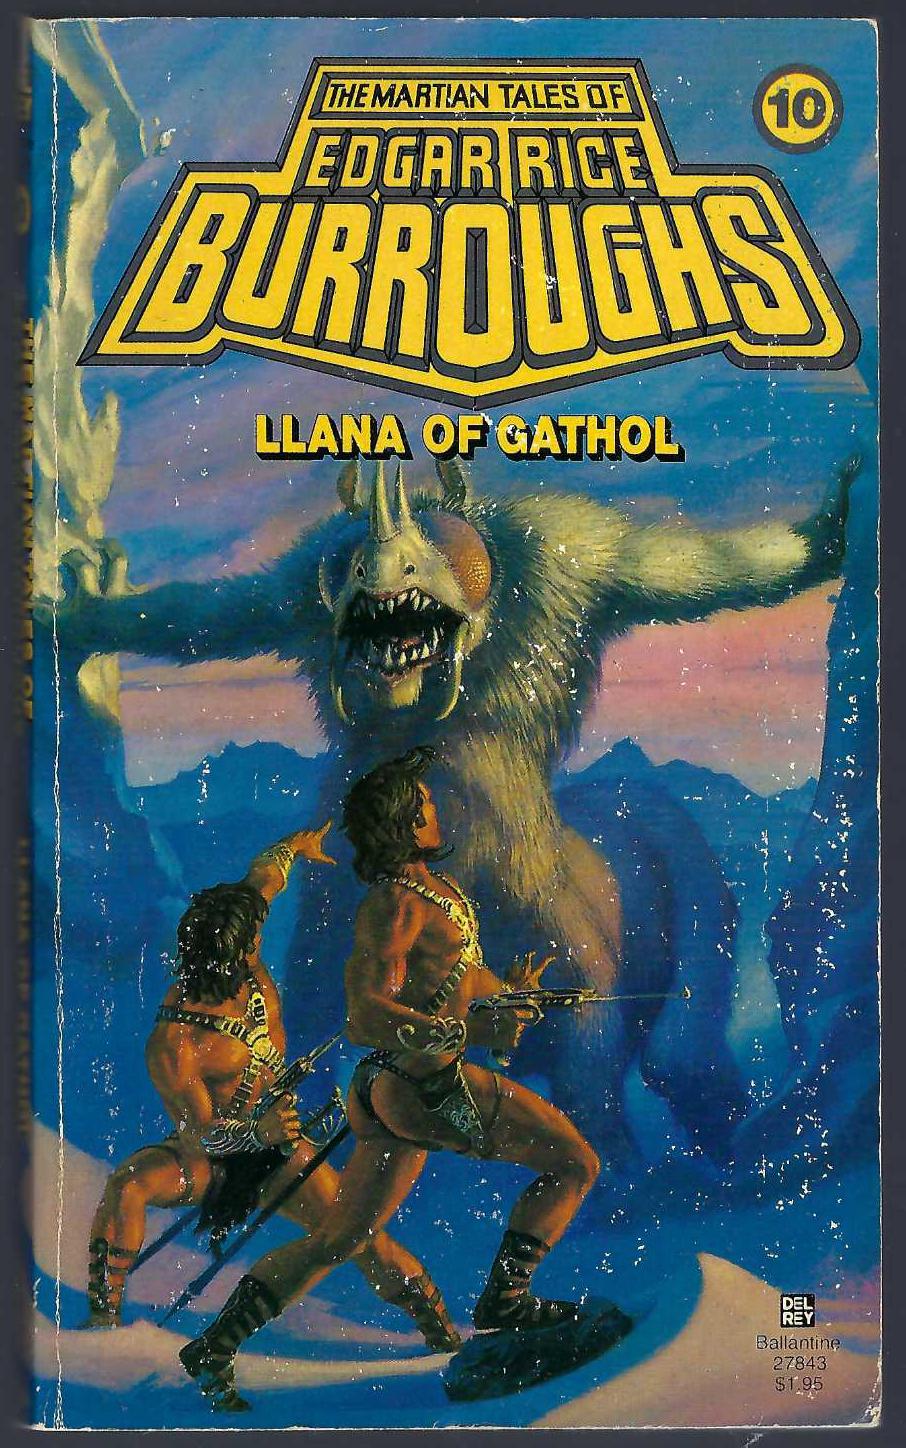 Llana of Gathol by Edgar Rice Burroughs front cover